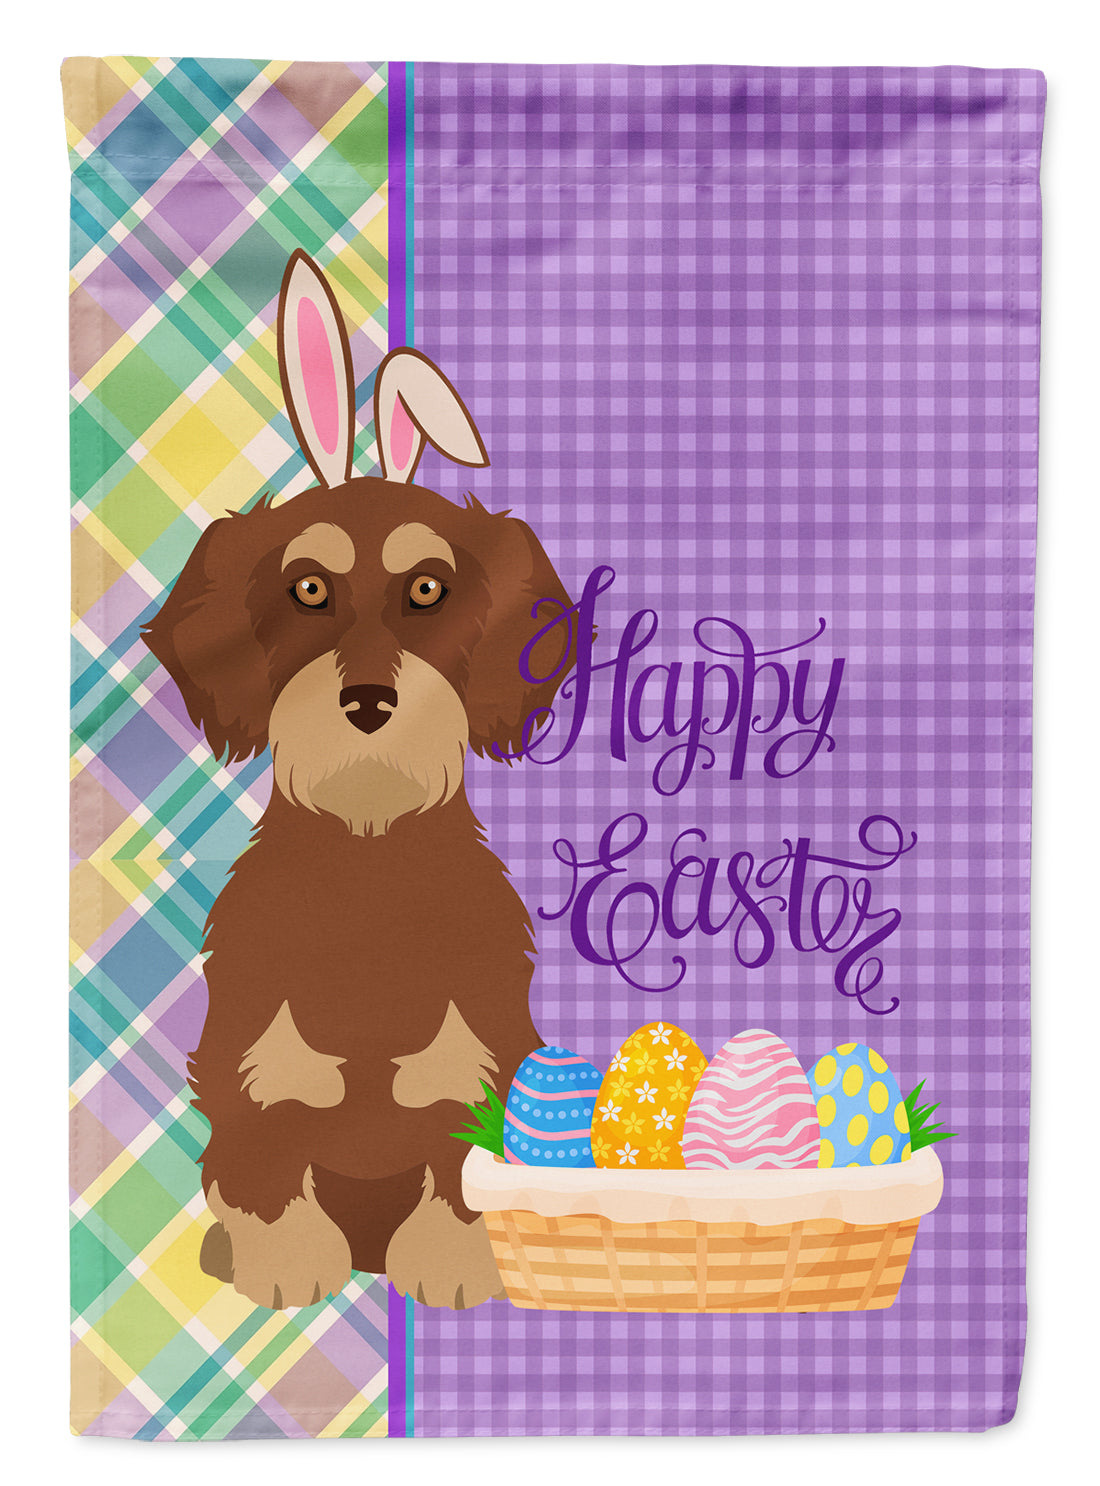 Wirehair Red and Tan Dachshund Easter Flag Garden Size